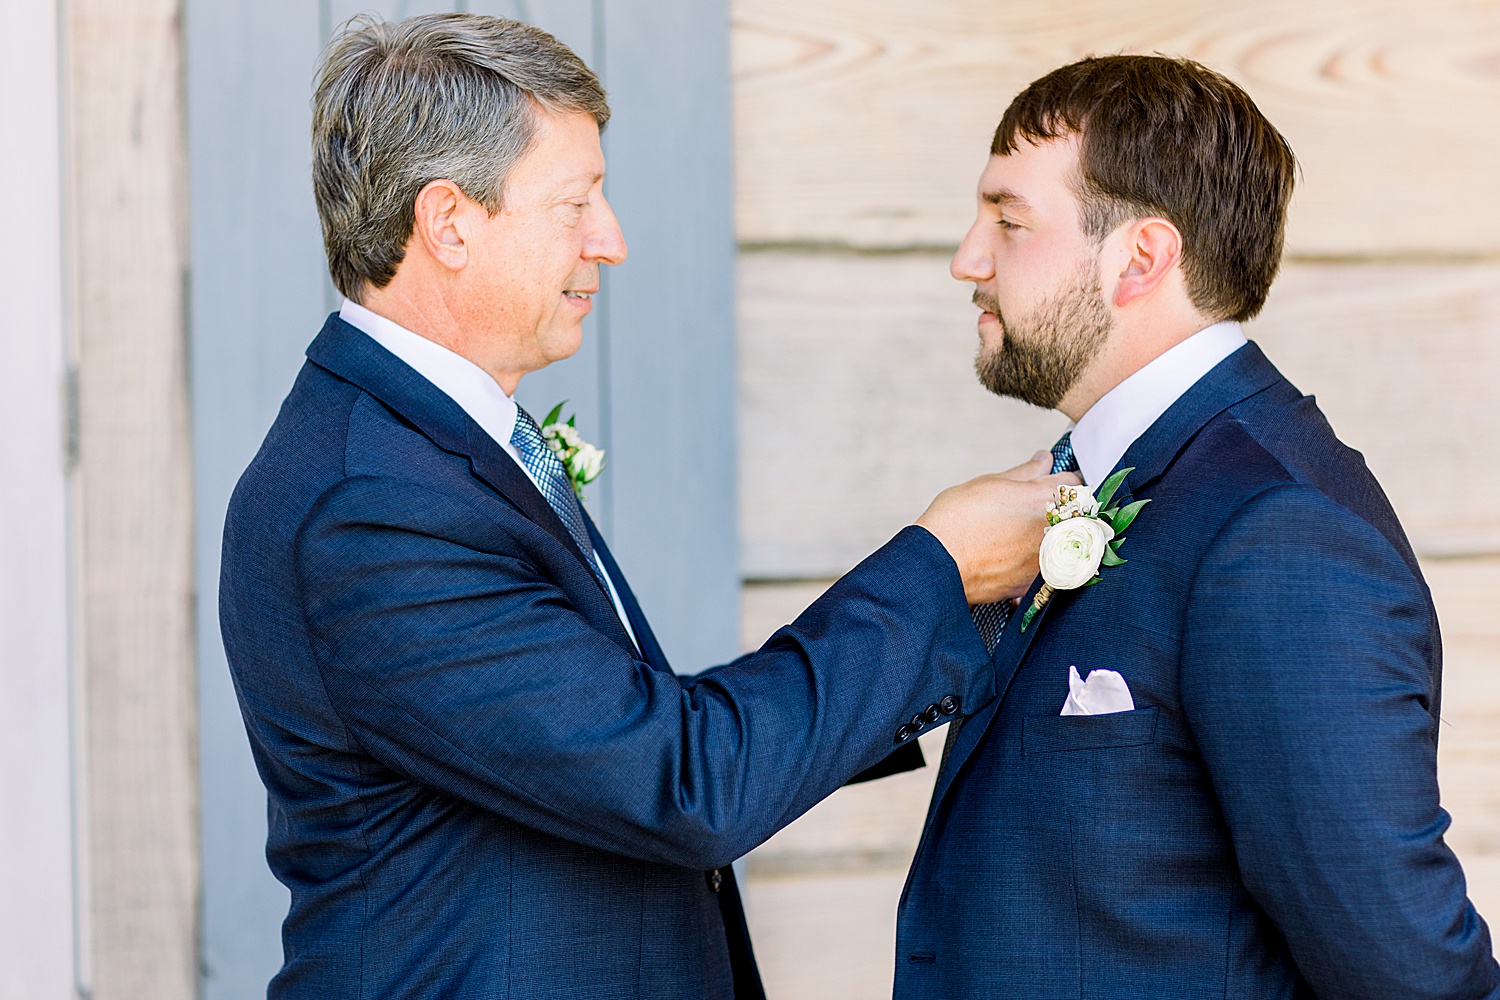 father of the groom helping Groom with tie